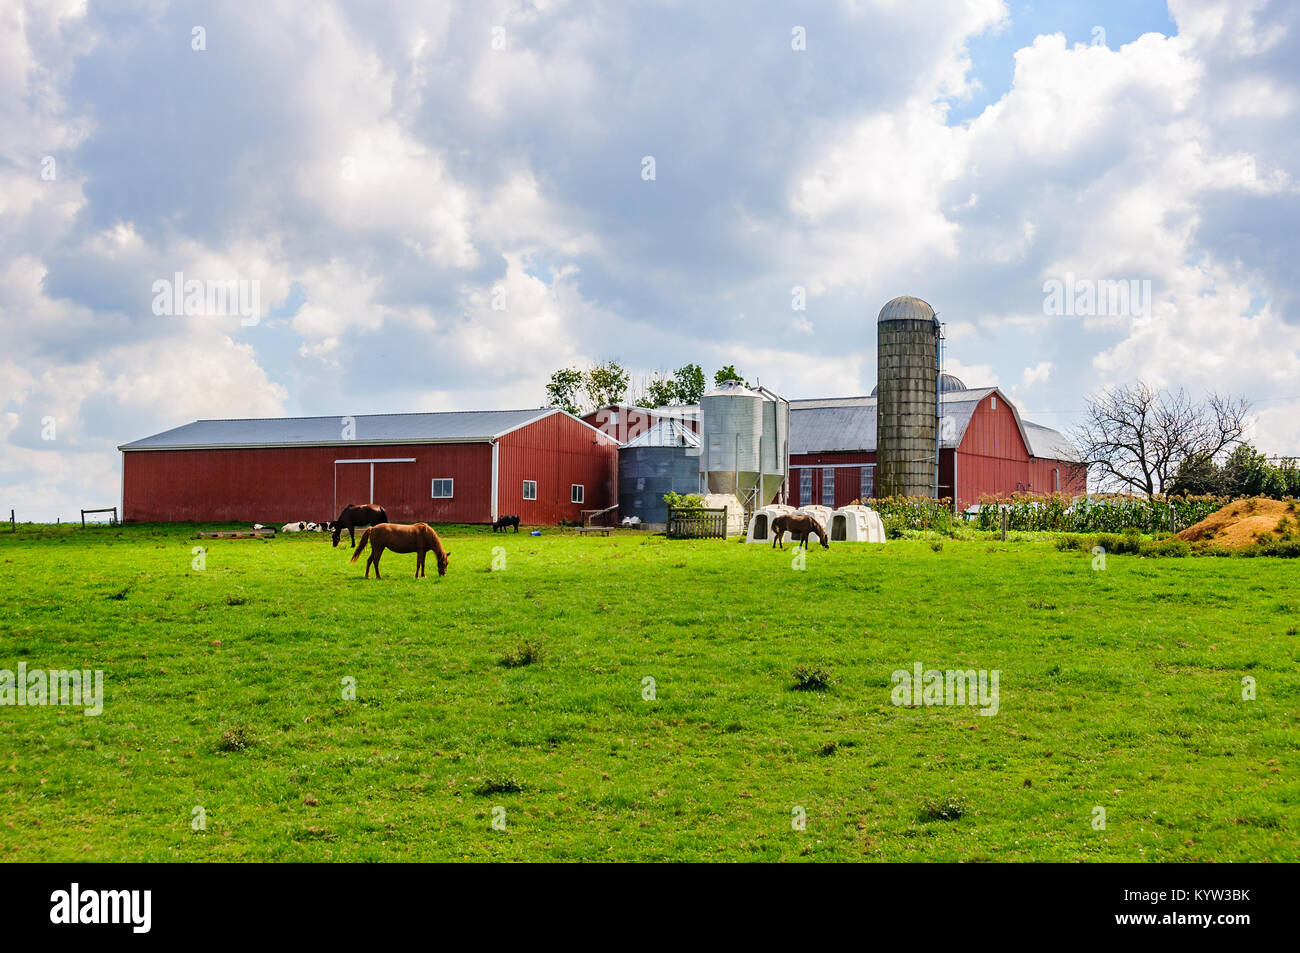 Farm buildings in Amish Country in Pennsylvania, USA Stock Photo